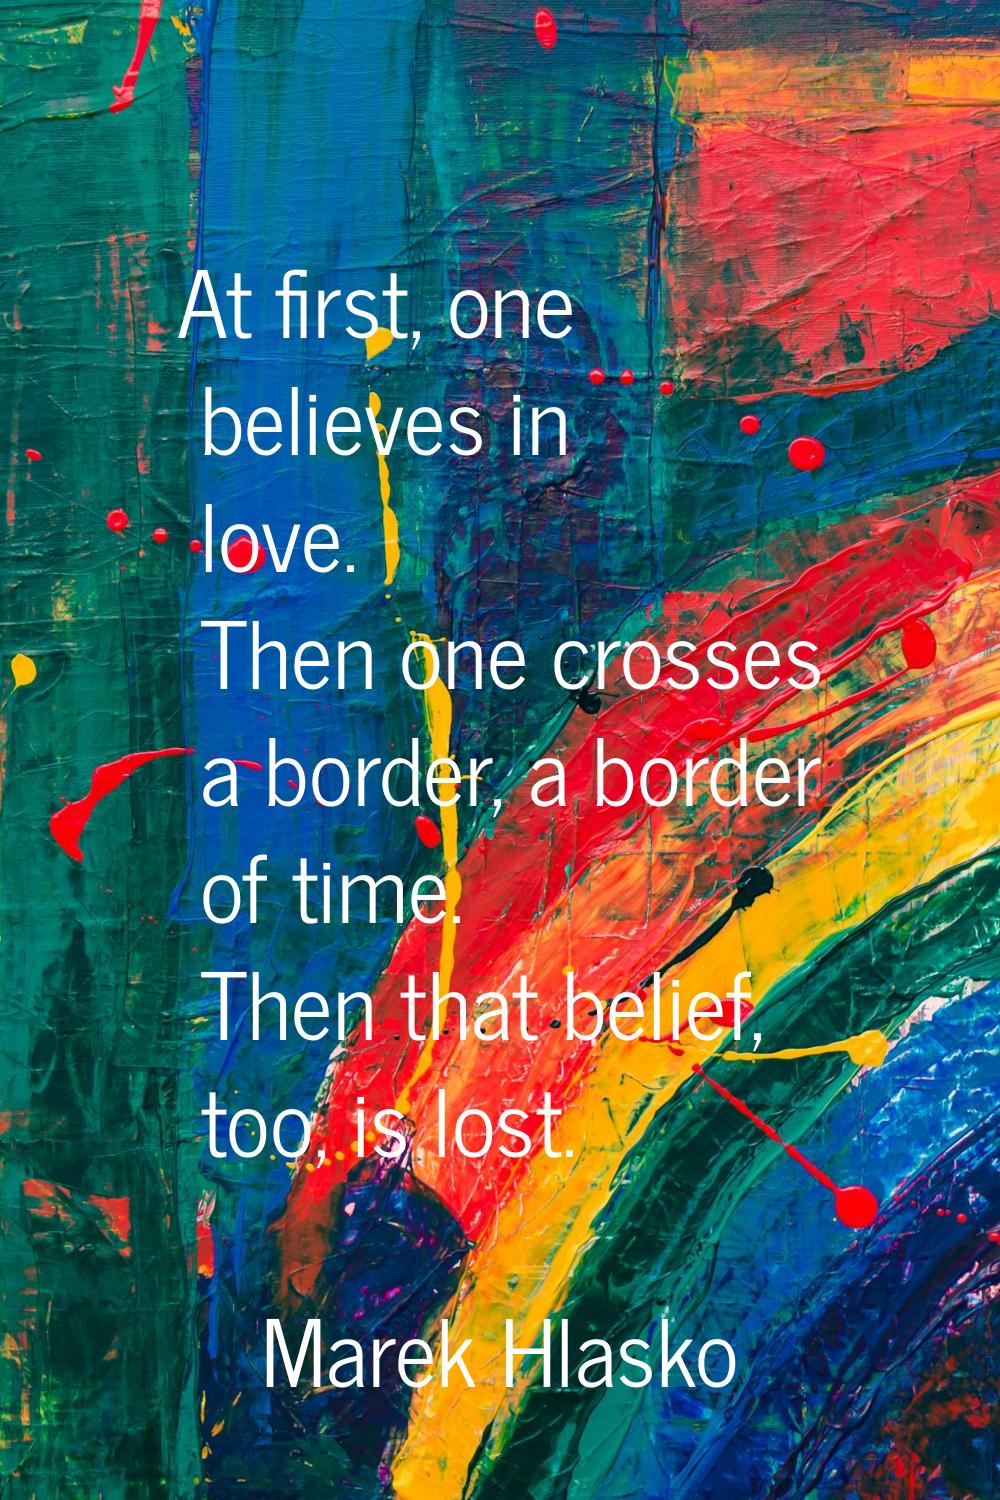 At first, one believes in love. Then one crosses a border, a border of time. Then that belief, too,